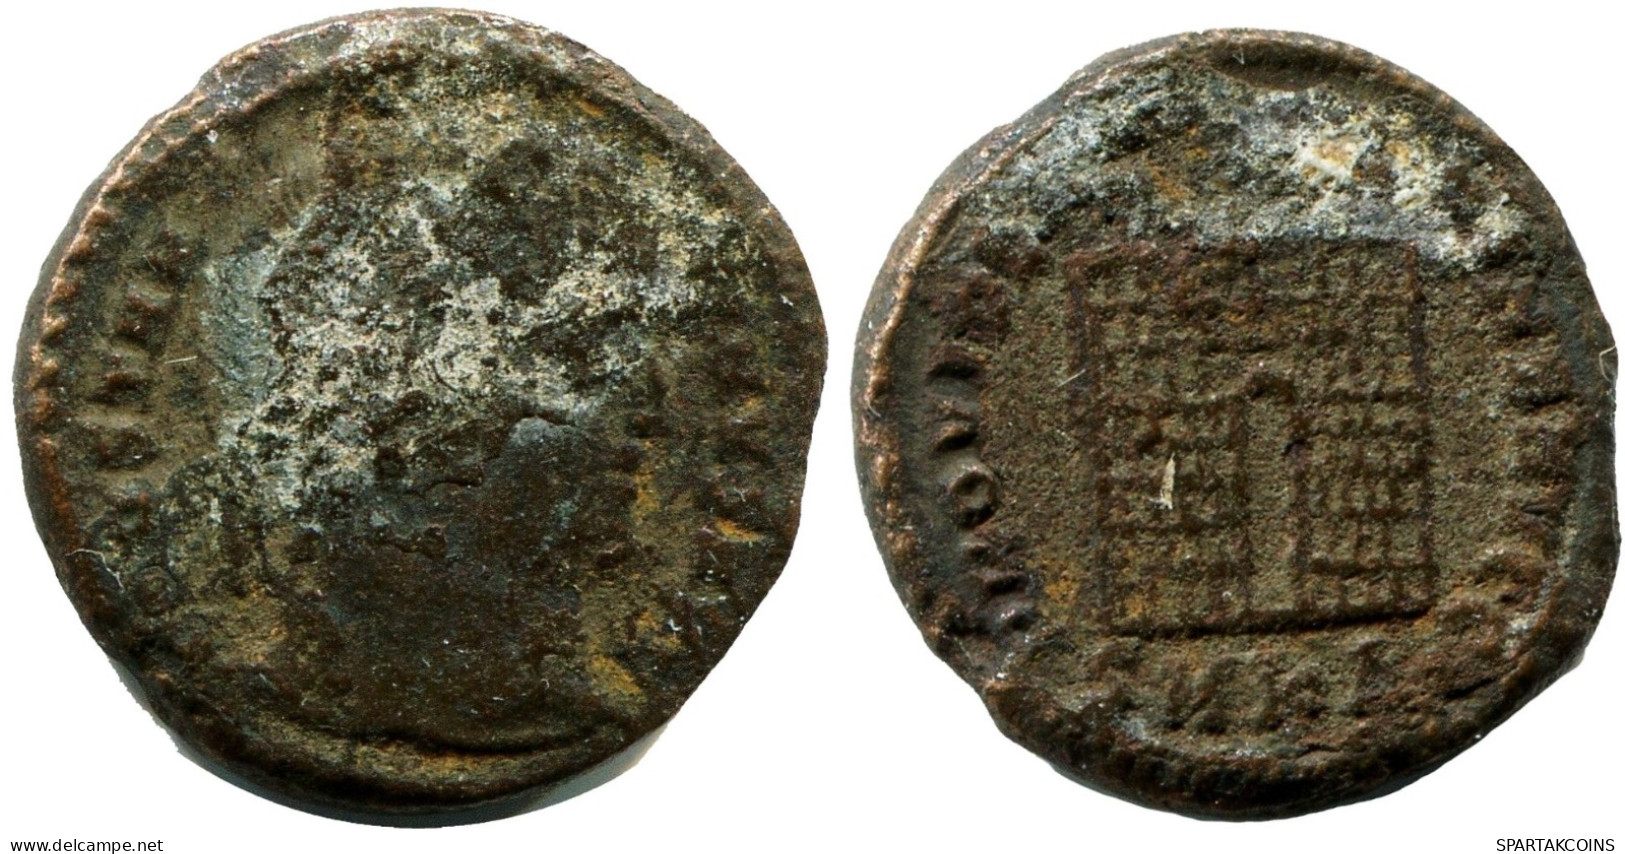 CONSTANTINE I MINTED IN CYZICUS FOUND IN IHNASYAH HOARD EGYPT #ANC11005.14.D.A - El Impero Christiano (307 / 363)